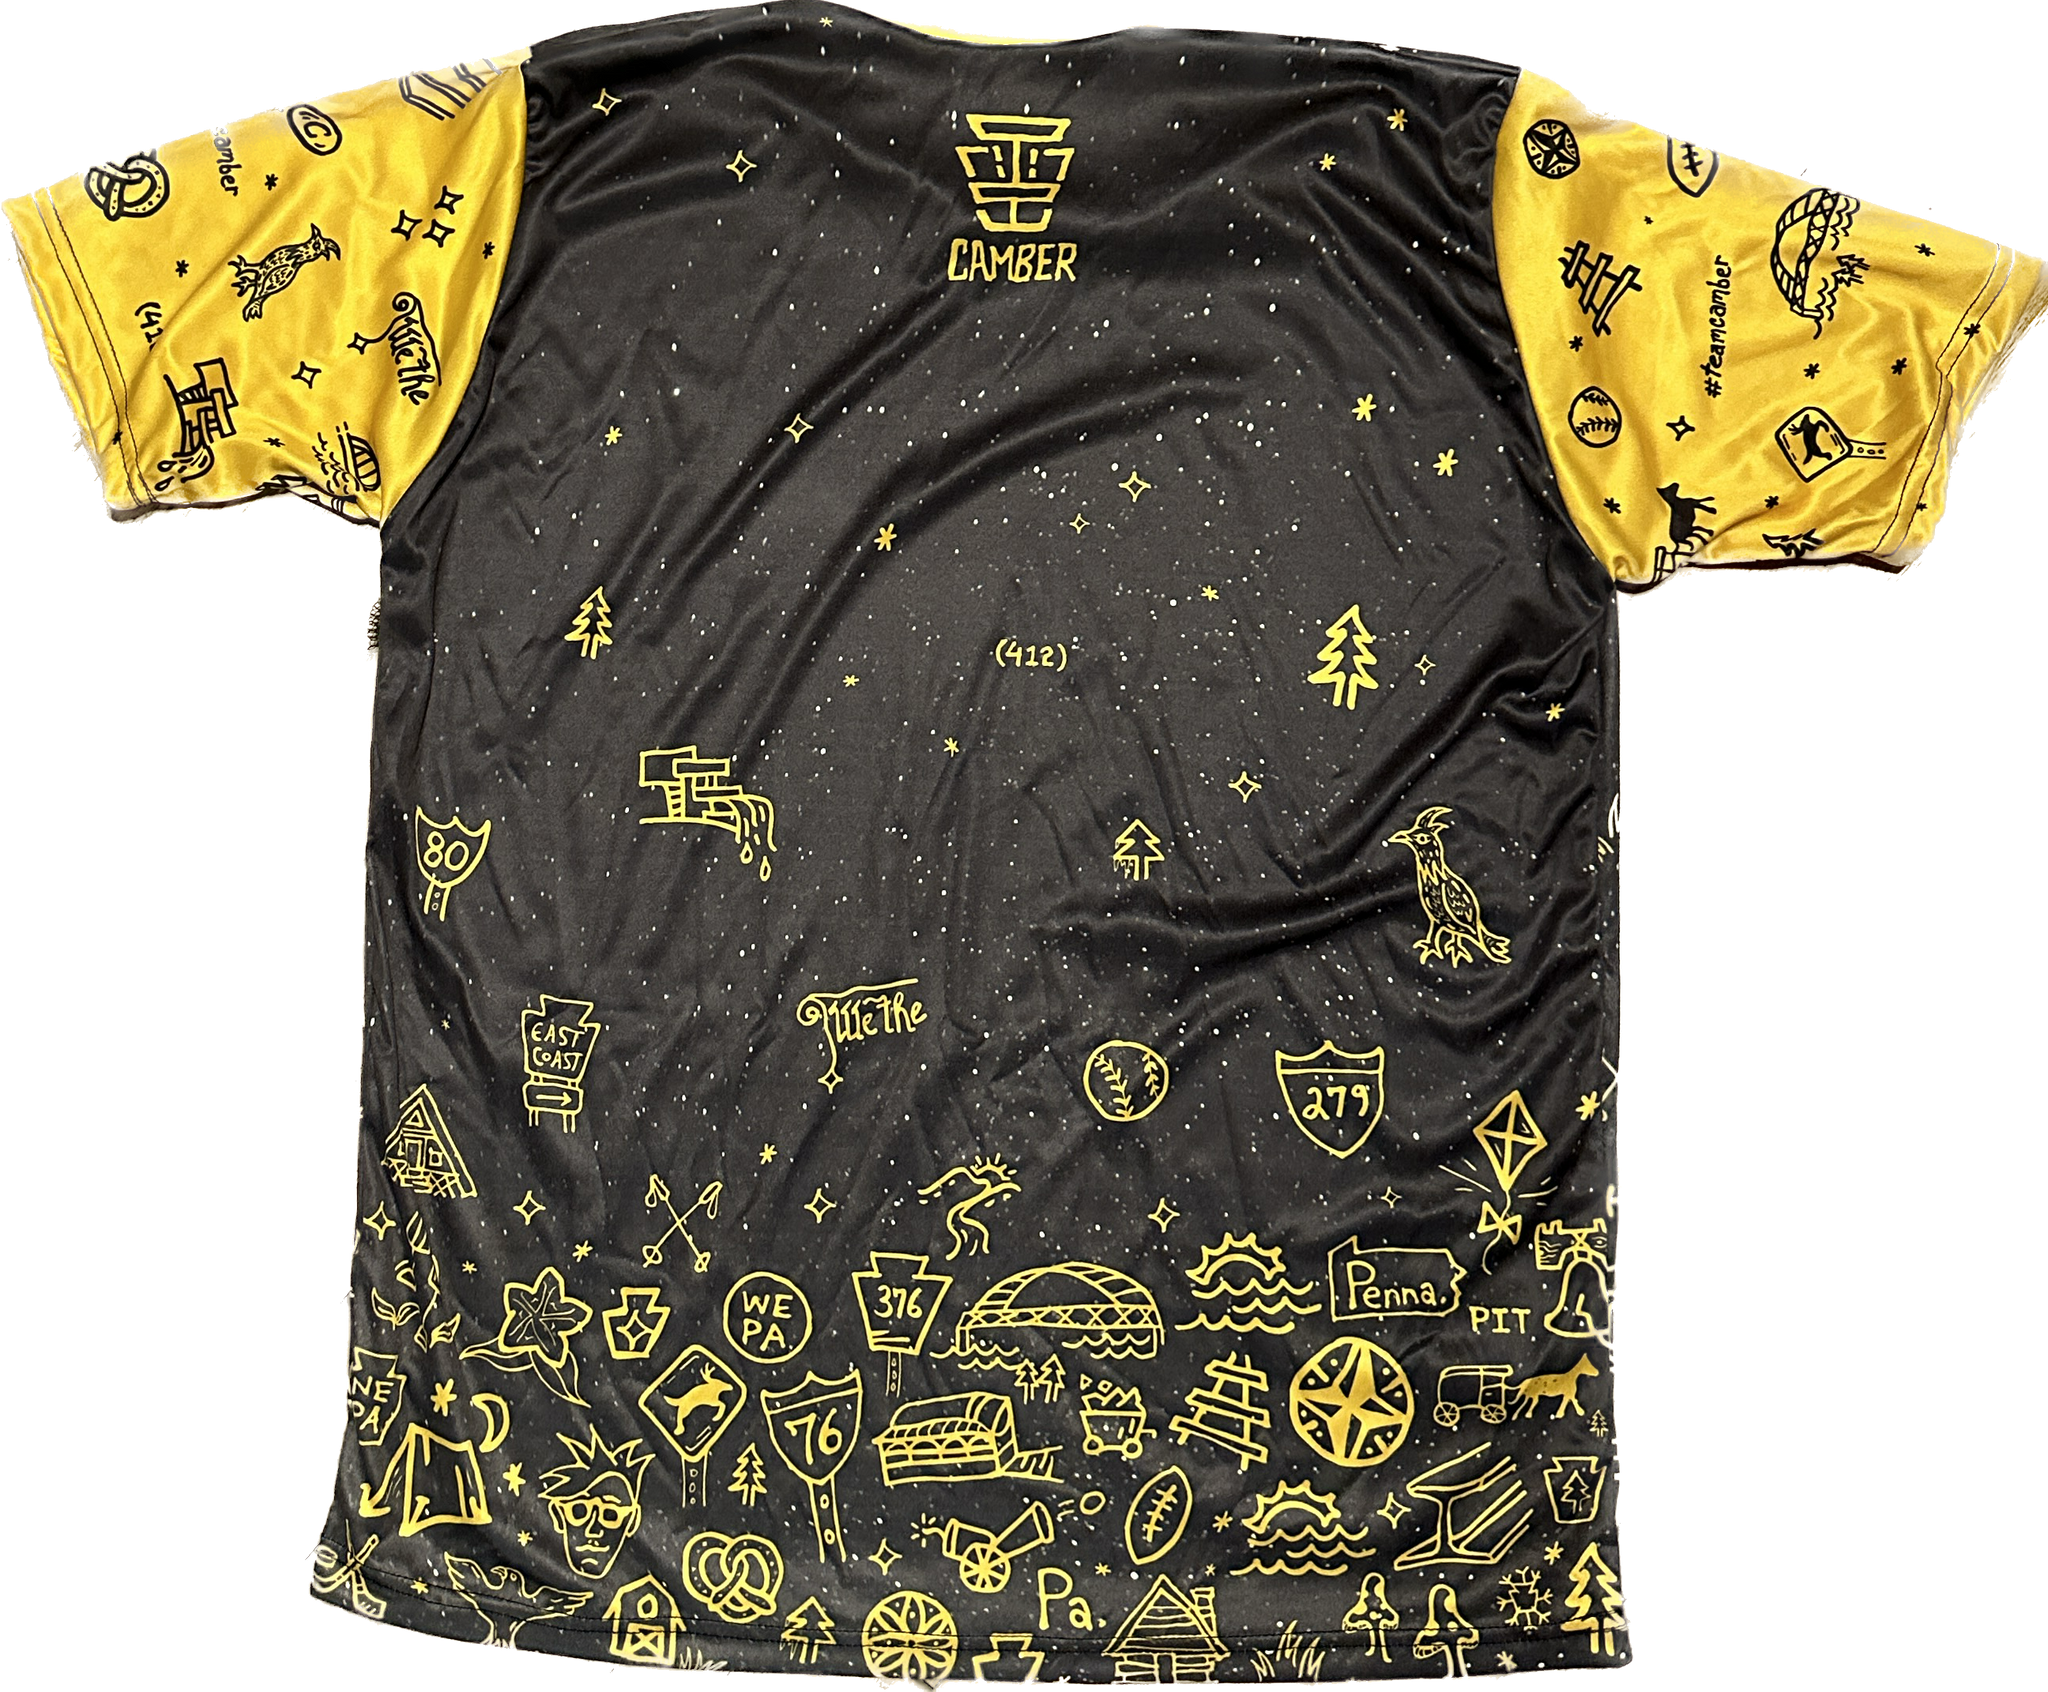 Camber Jersey- Black and Gold – Camber Disc Golf Company